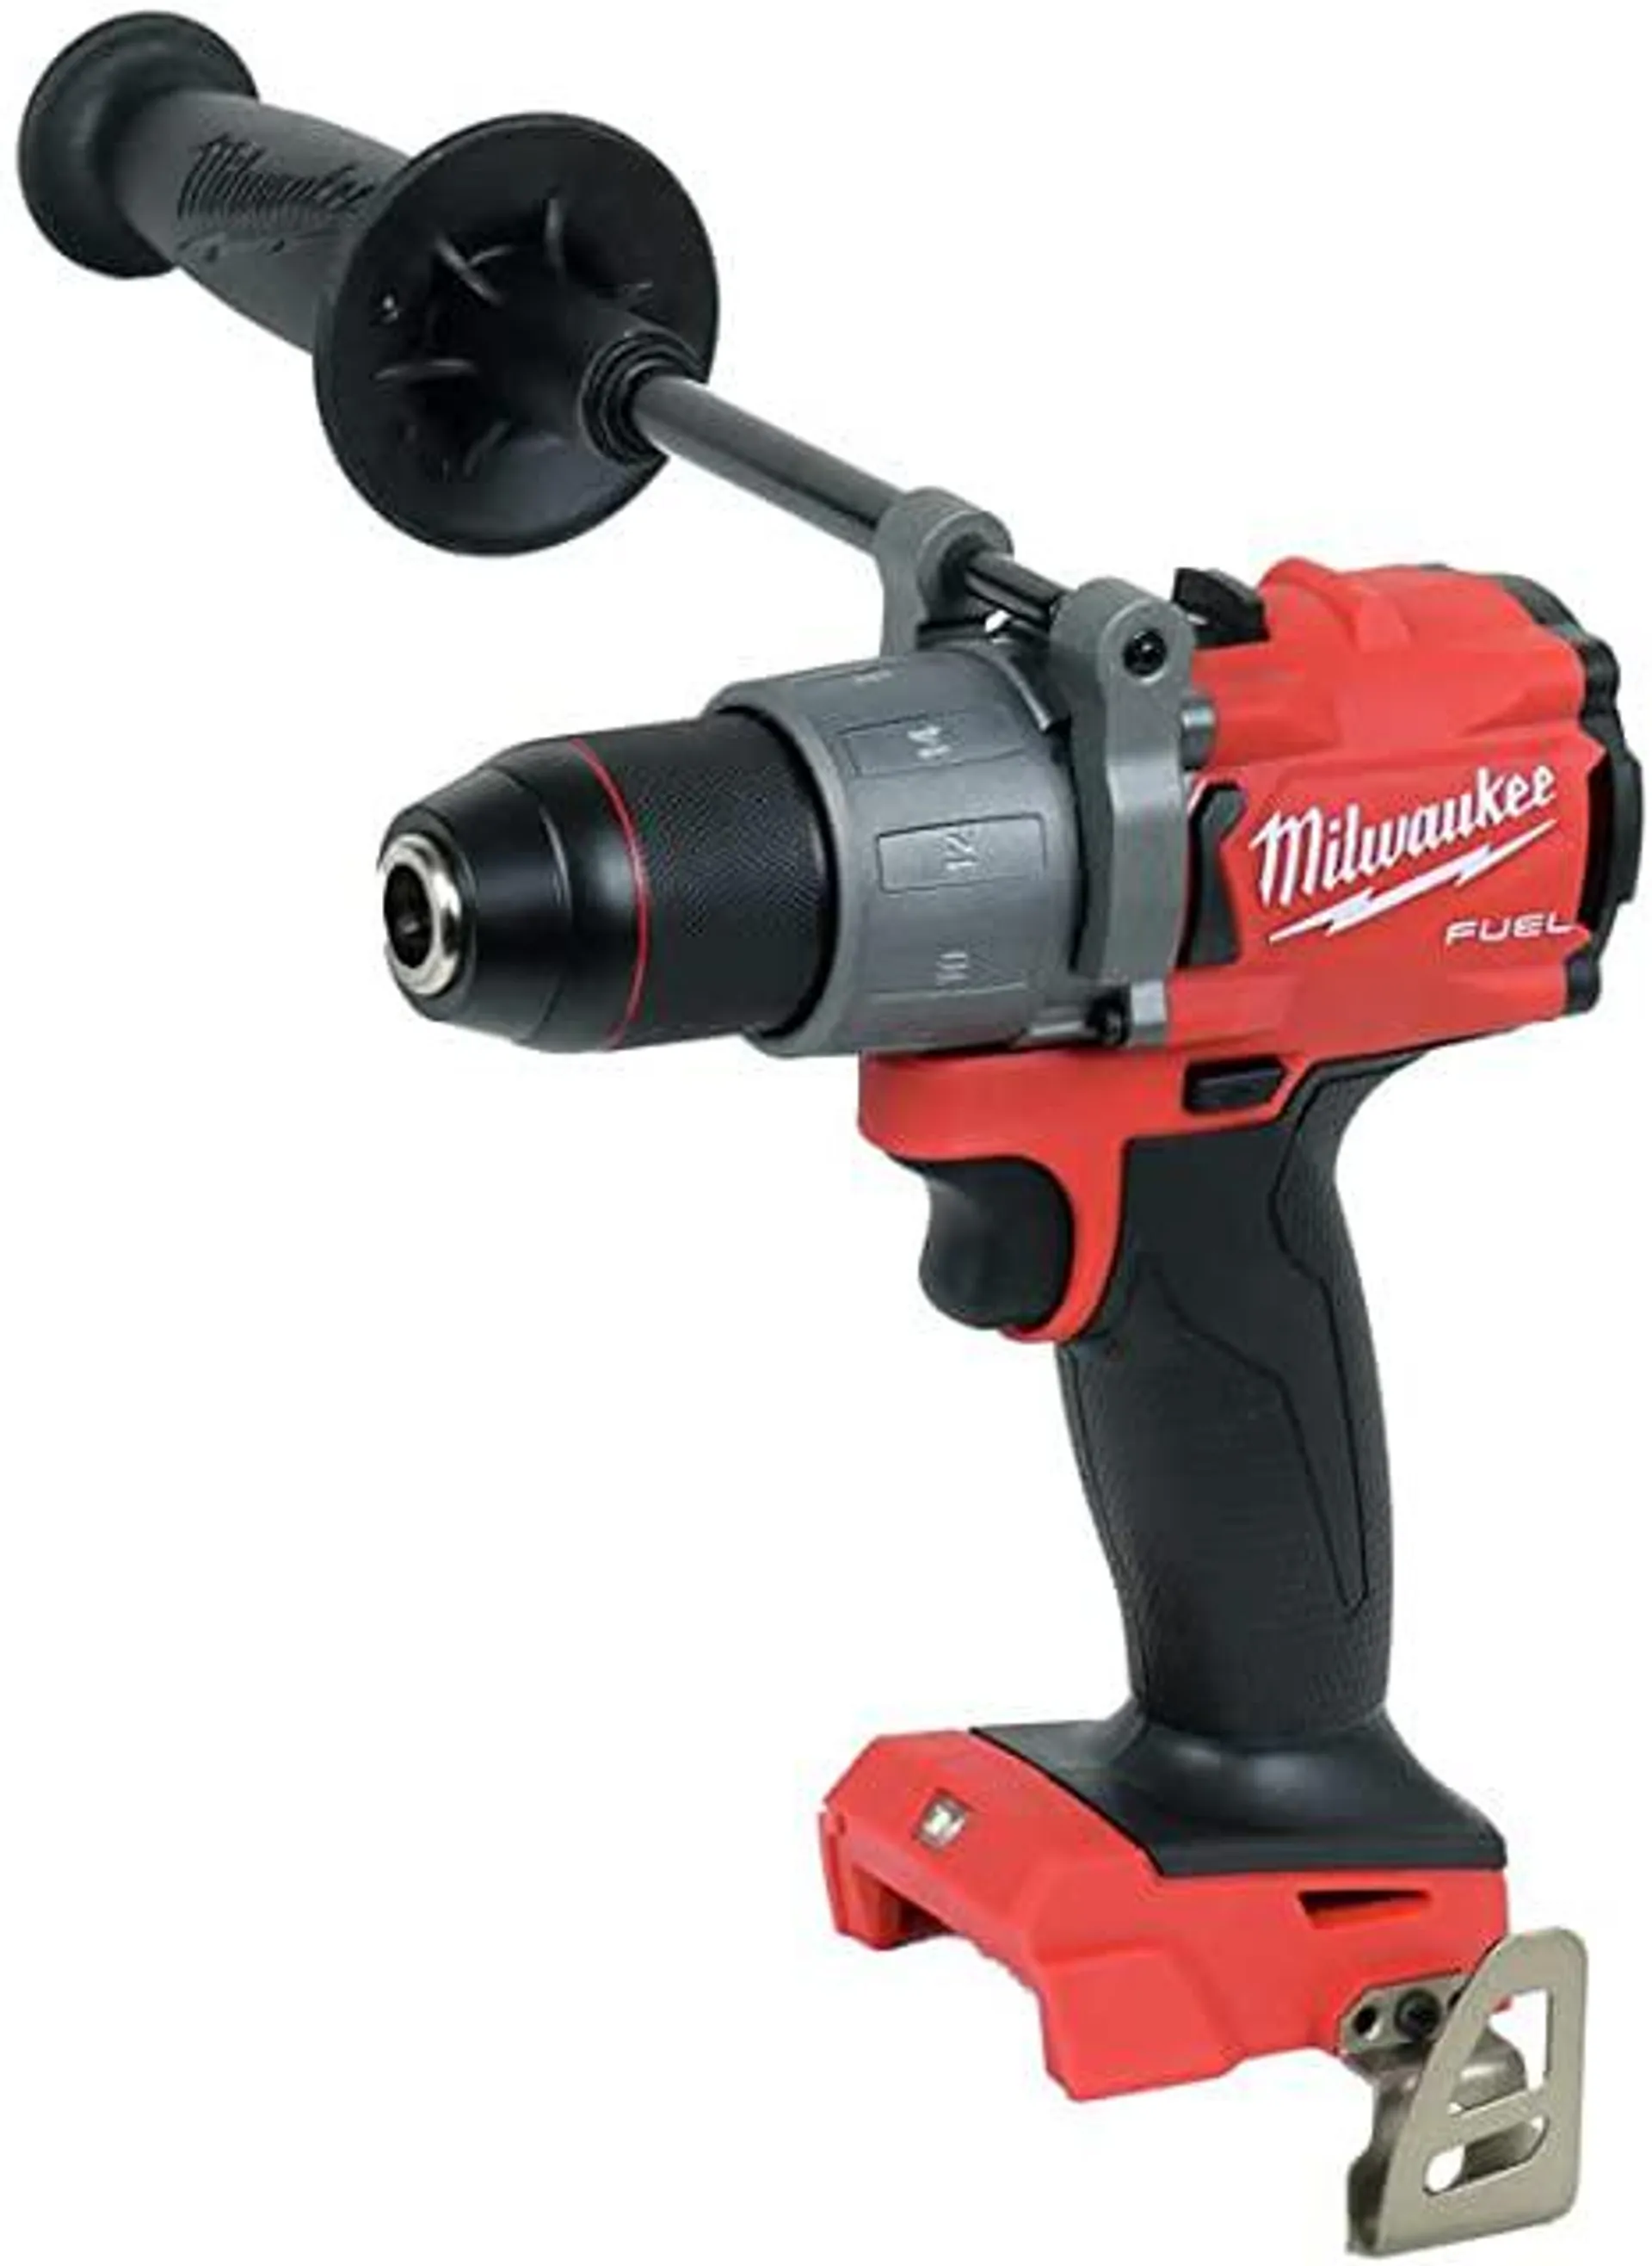 Milwaukee 2804-20 M18 FUEL 1/2 in. Hammer Drill (Tool Only) Tool-Peak Torque = 1,200